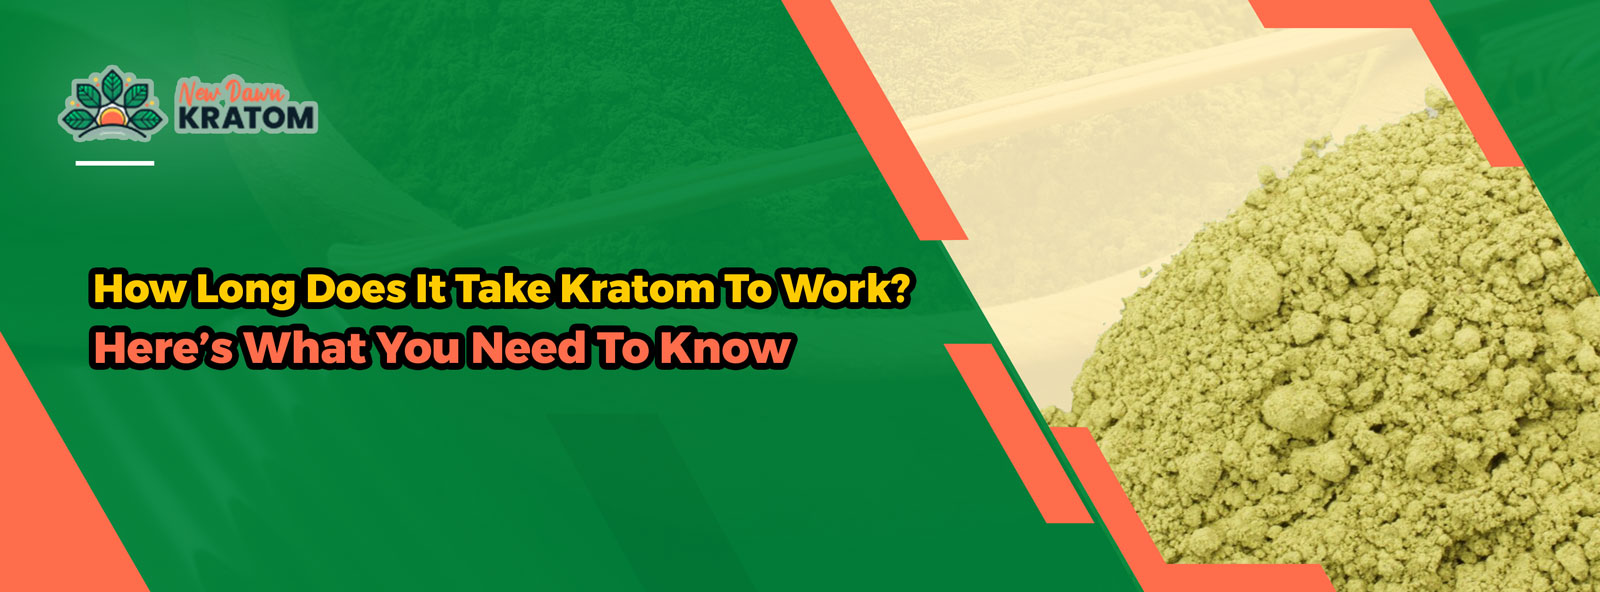 How Long Does It Take Kratom To Work? Here’s What You Need To Know